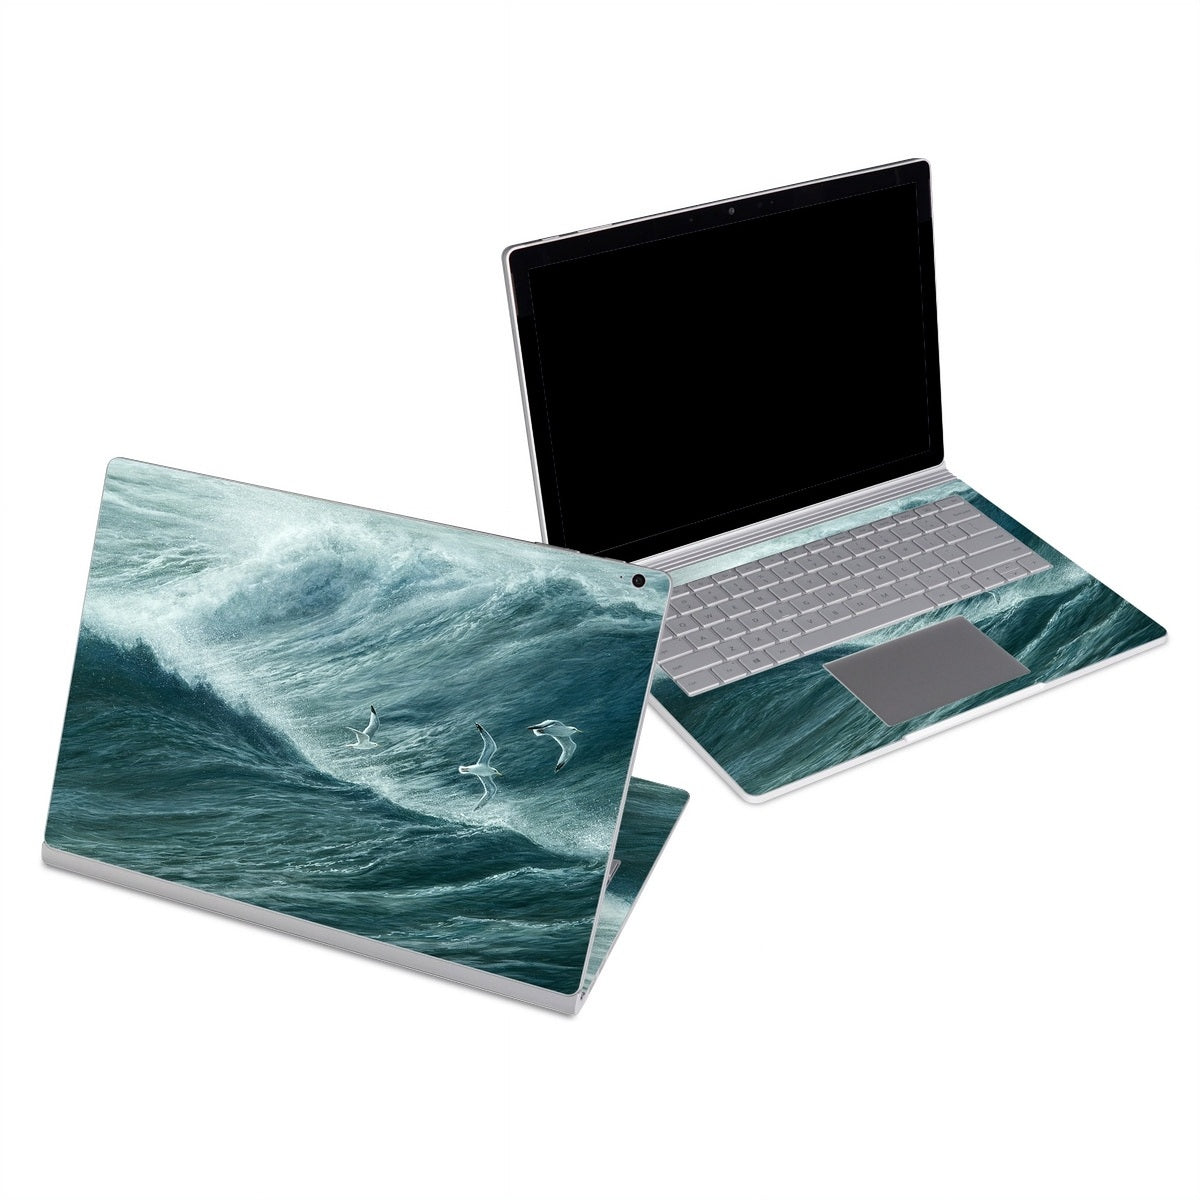 Riding the Wind - Microsoft Surface Book Skin